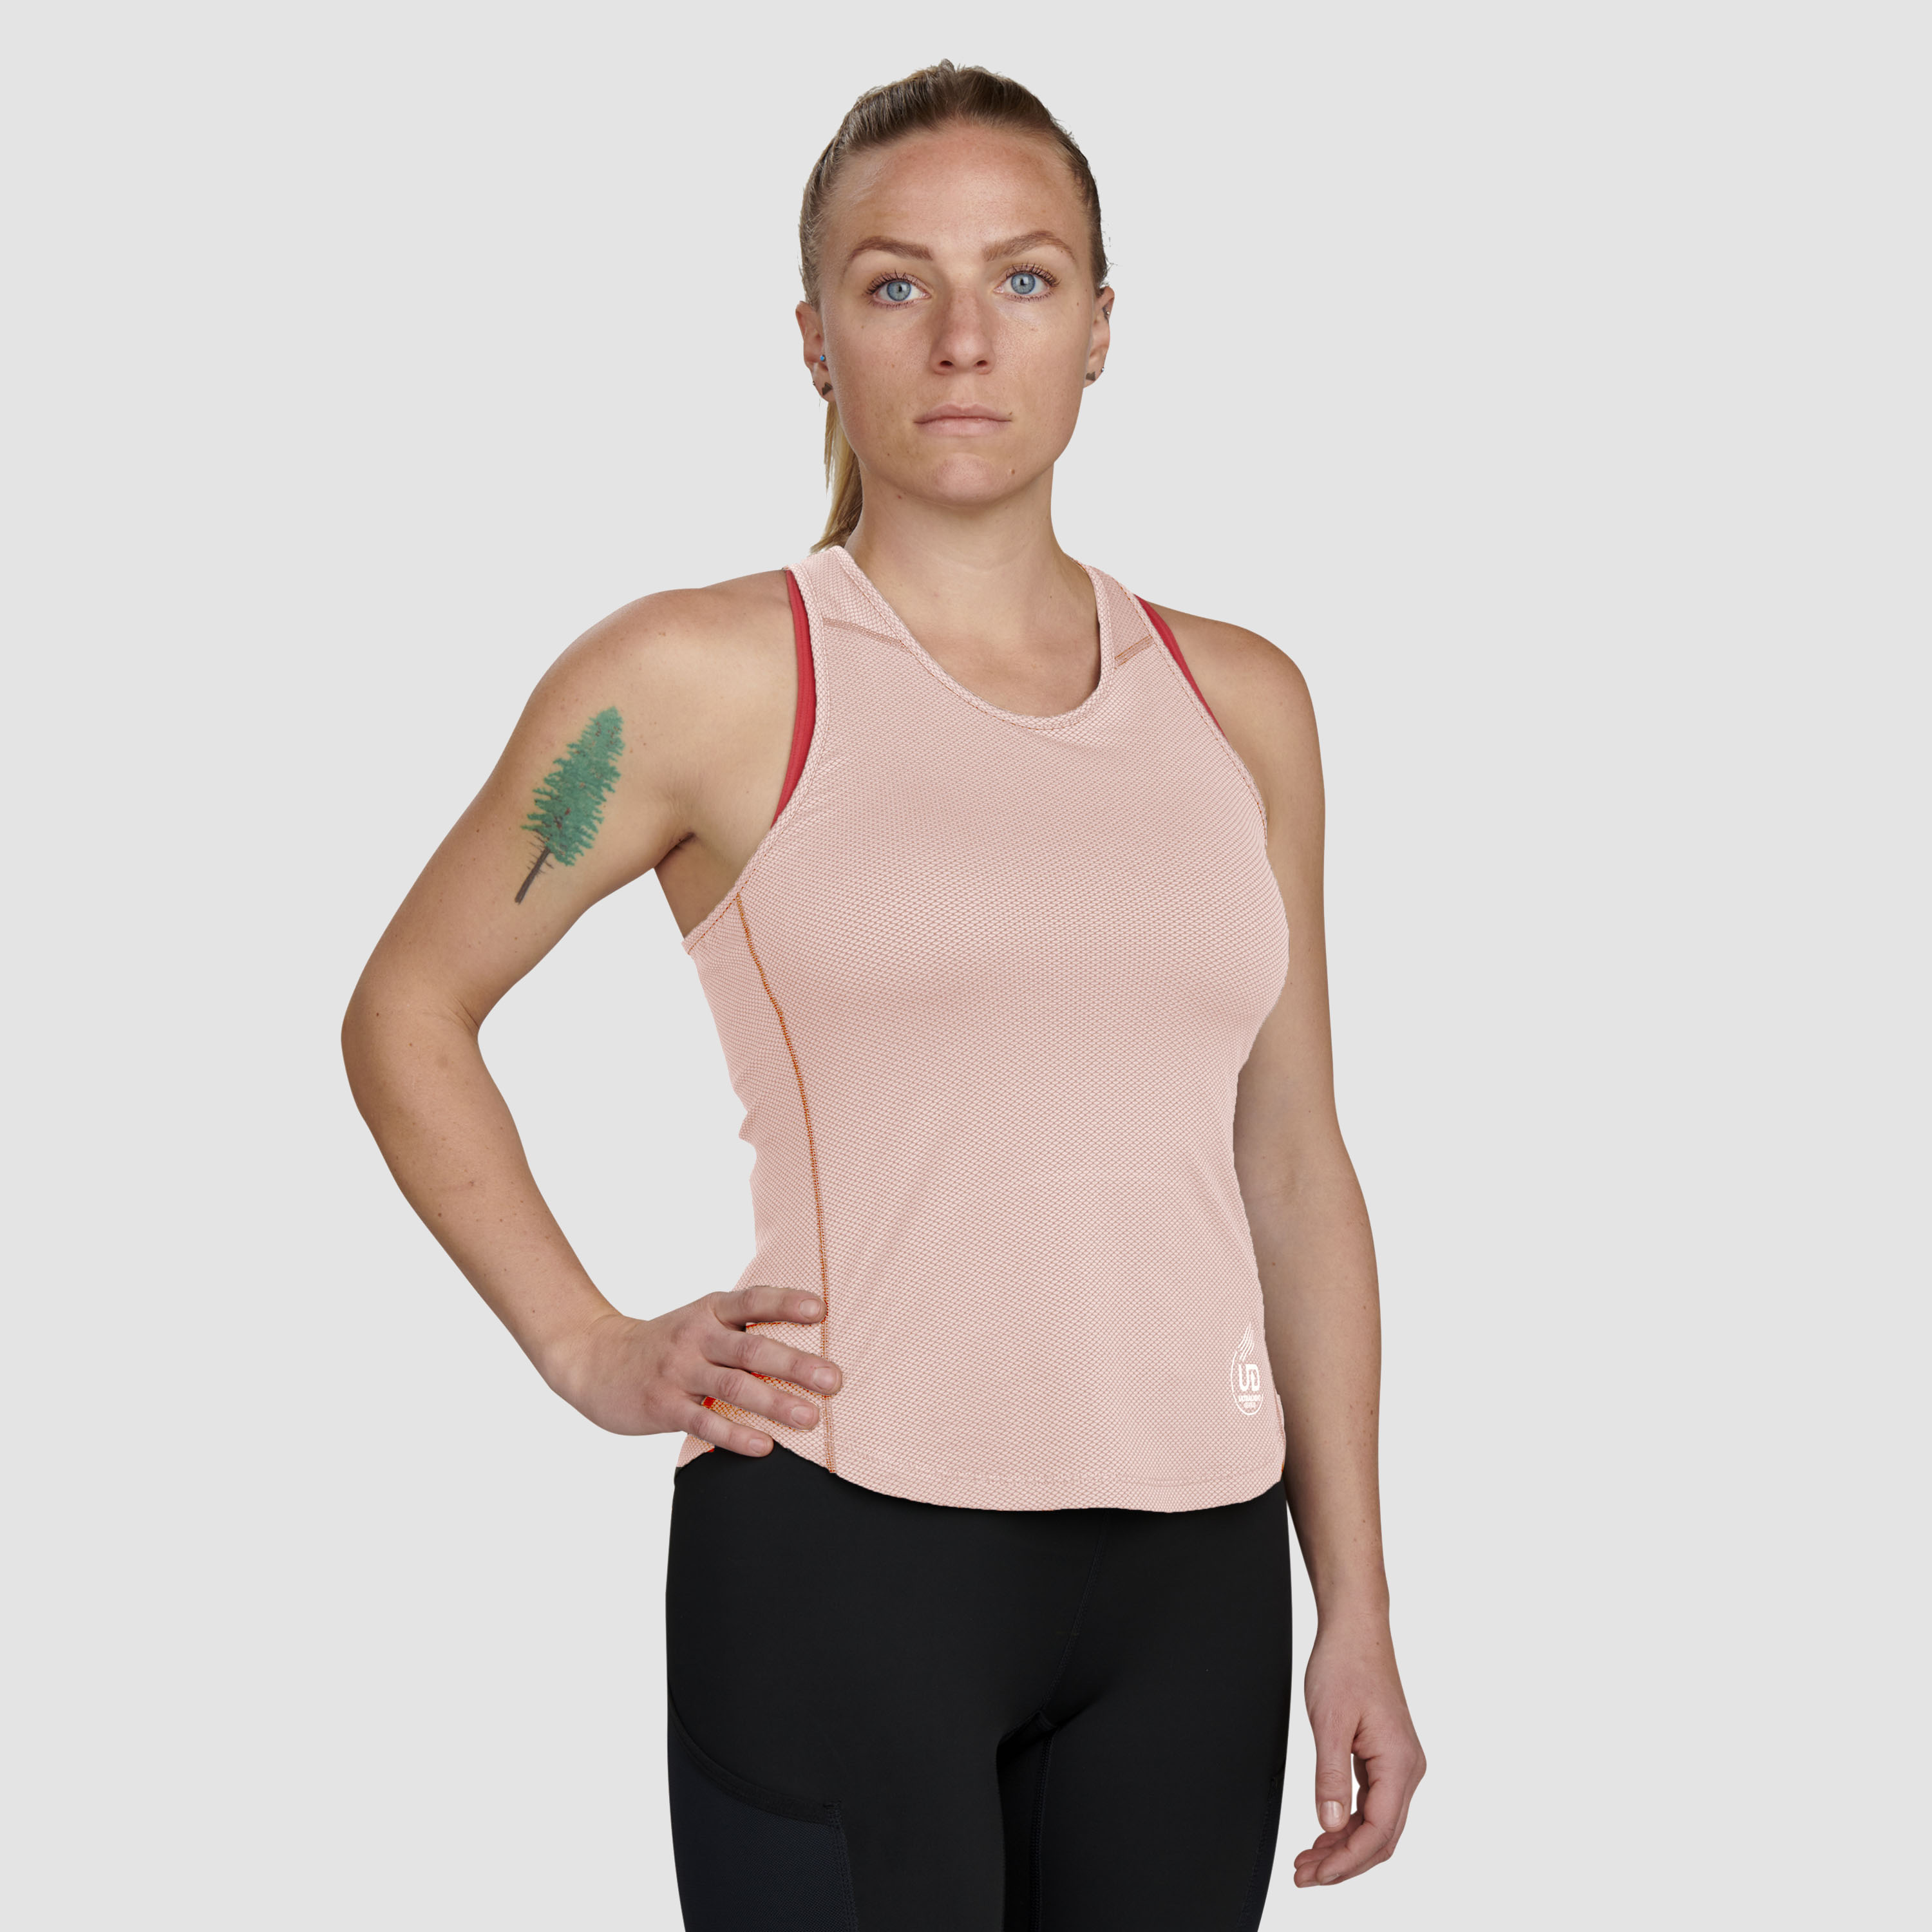 Ultimate Direction Women's Cumulus Tank Top - Prior Year in Millennial Pink Size XS